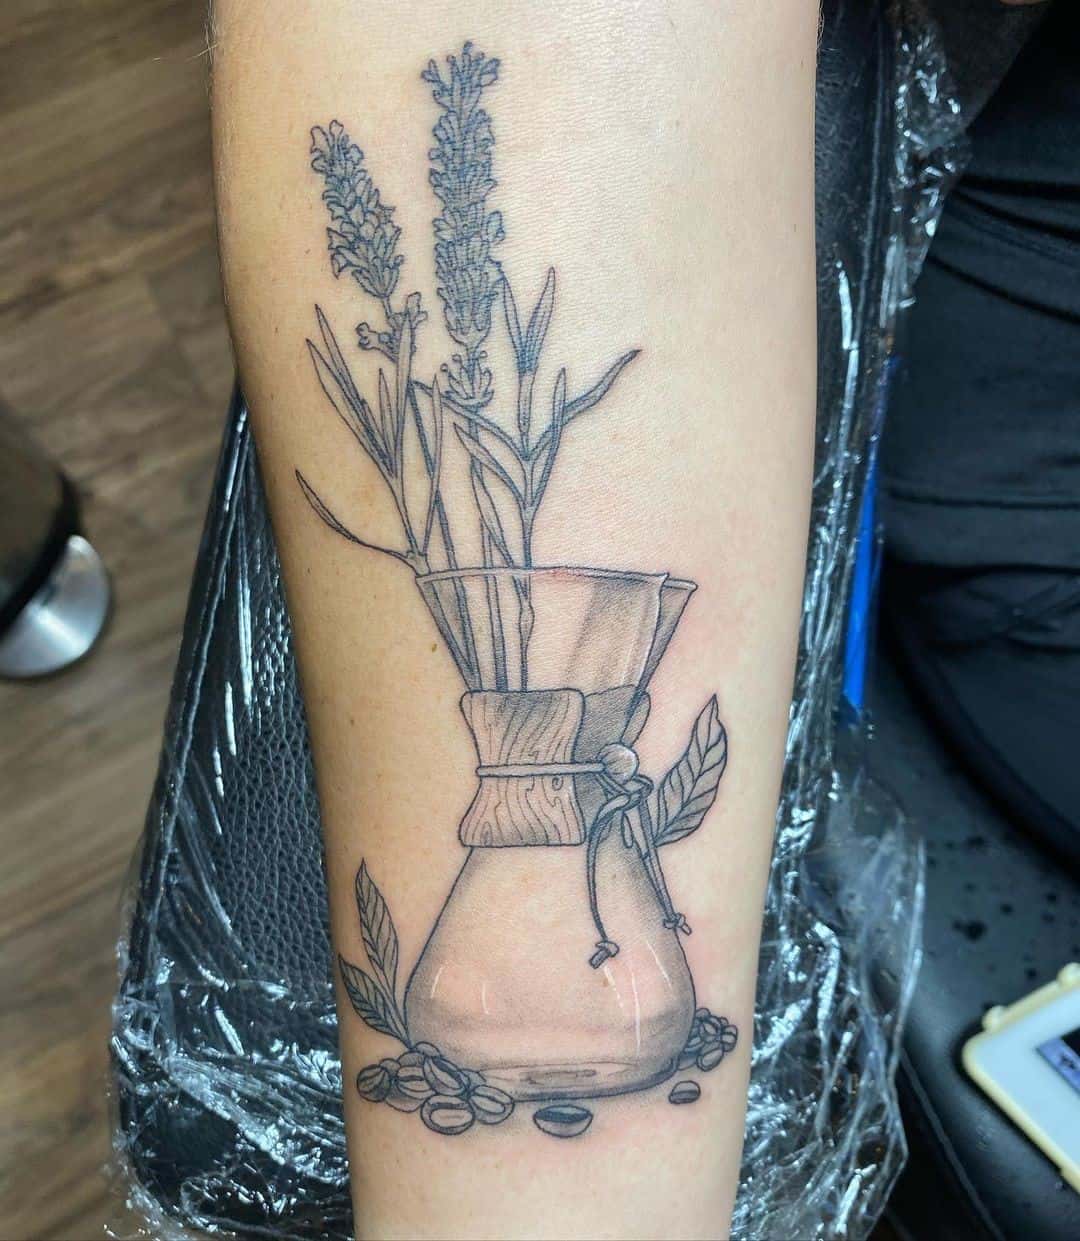 Lavender in another object tattoo